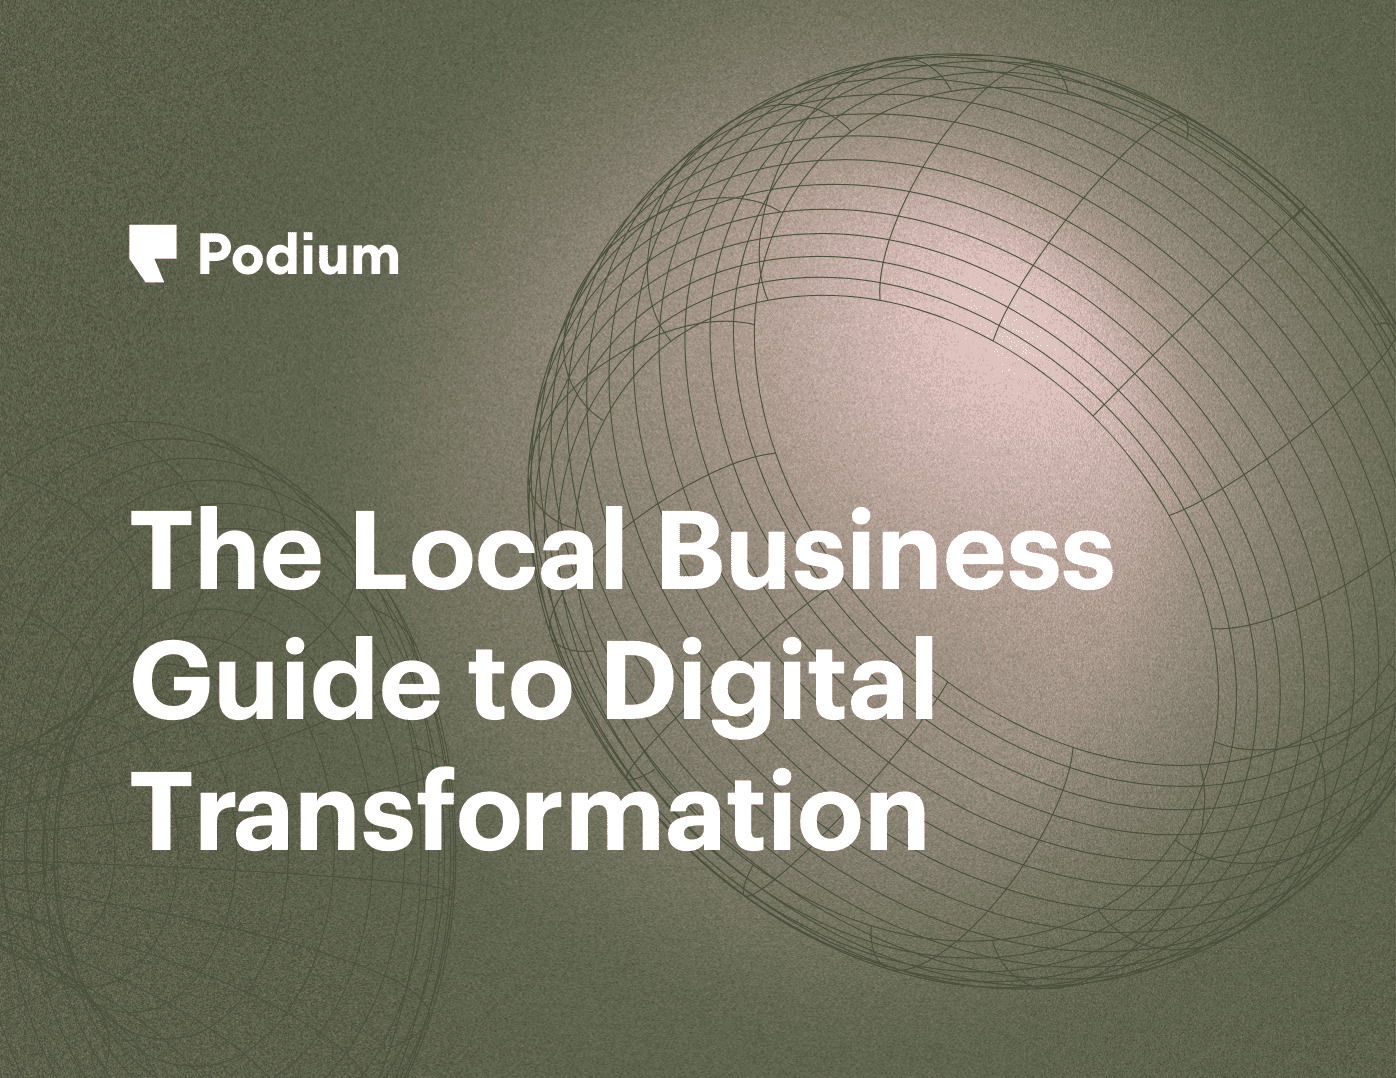 The Local Business Guide to Digital Transformation